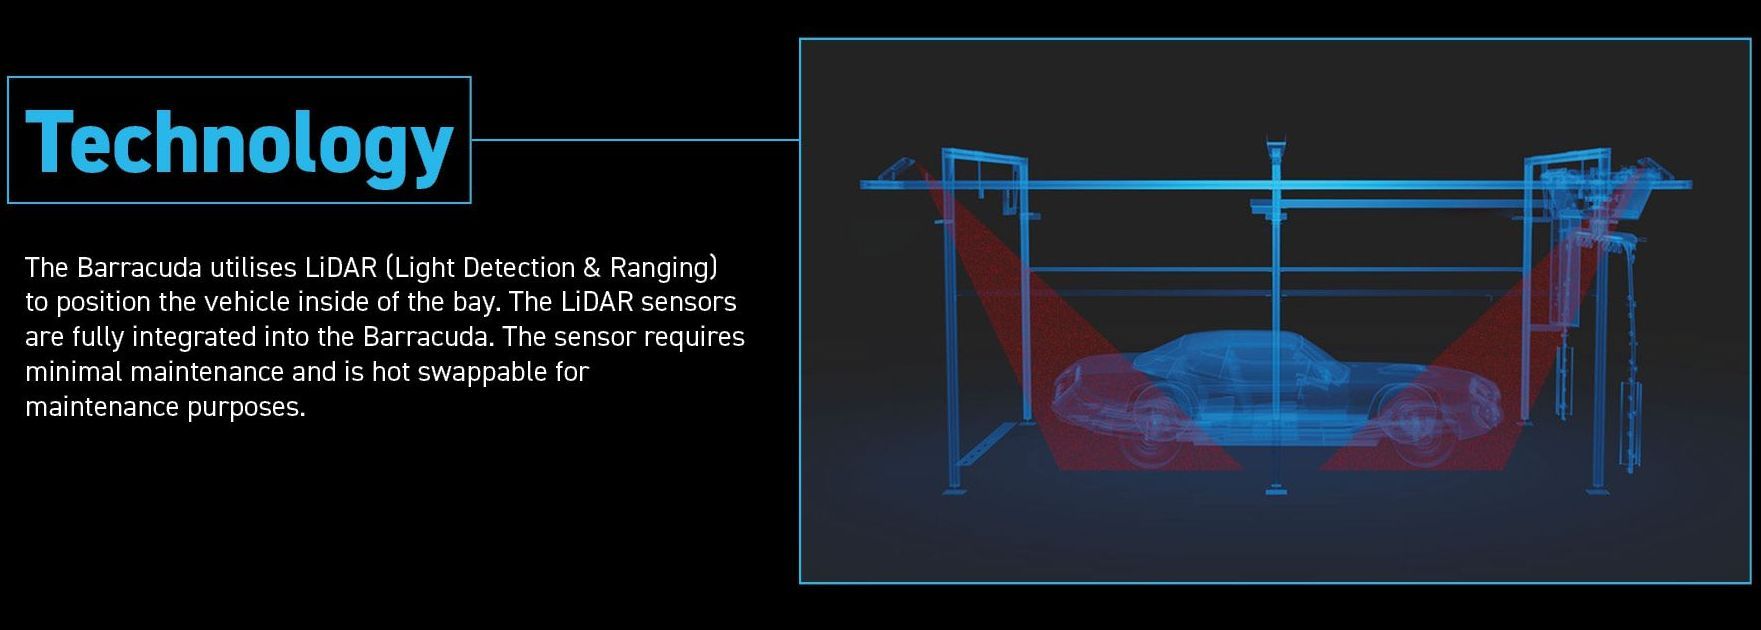 The Barracuda utilizes LiDAR (light Detection & Ranging) to position the vehicle inside the bay and there is a 3D model showing the sensors hitting the front and back of a car. 